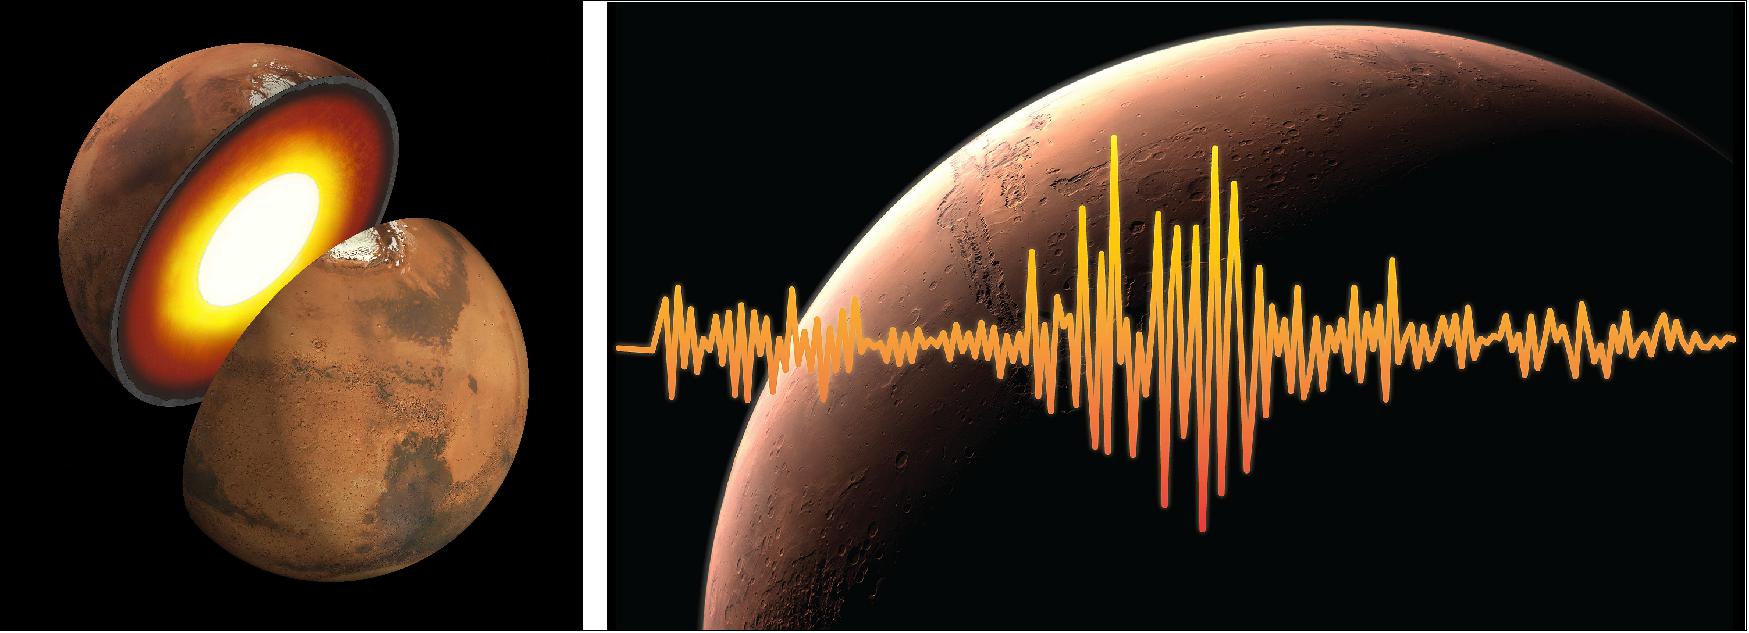 Figure 1: Left: Artist’s rendition showing the inner structure of Mars. The topmost layer is known as the crust, underneath it is the mantle, which rests on a solid inner core. Right: Measuring the pulse of Mars by determining the level of tectonic activity (impact of meteorites) on Mars (image credit: NASA/JPL-Caltech)